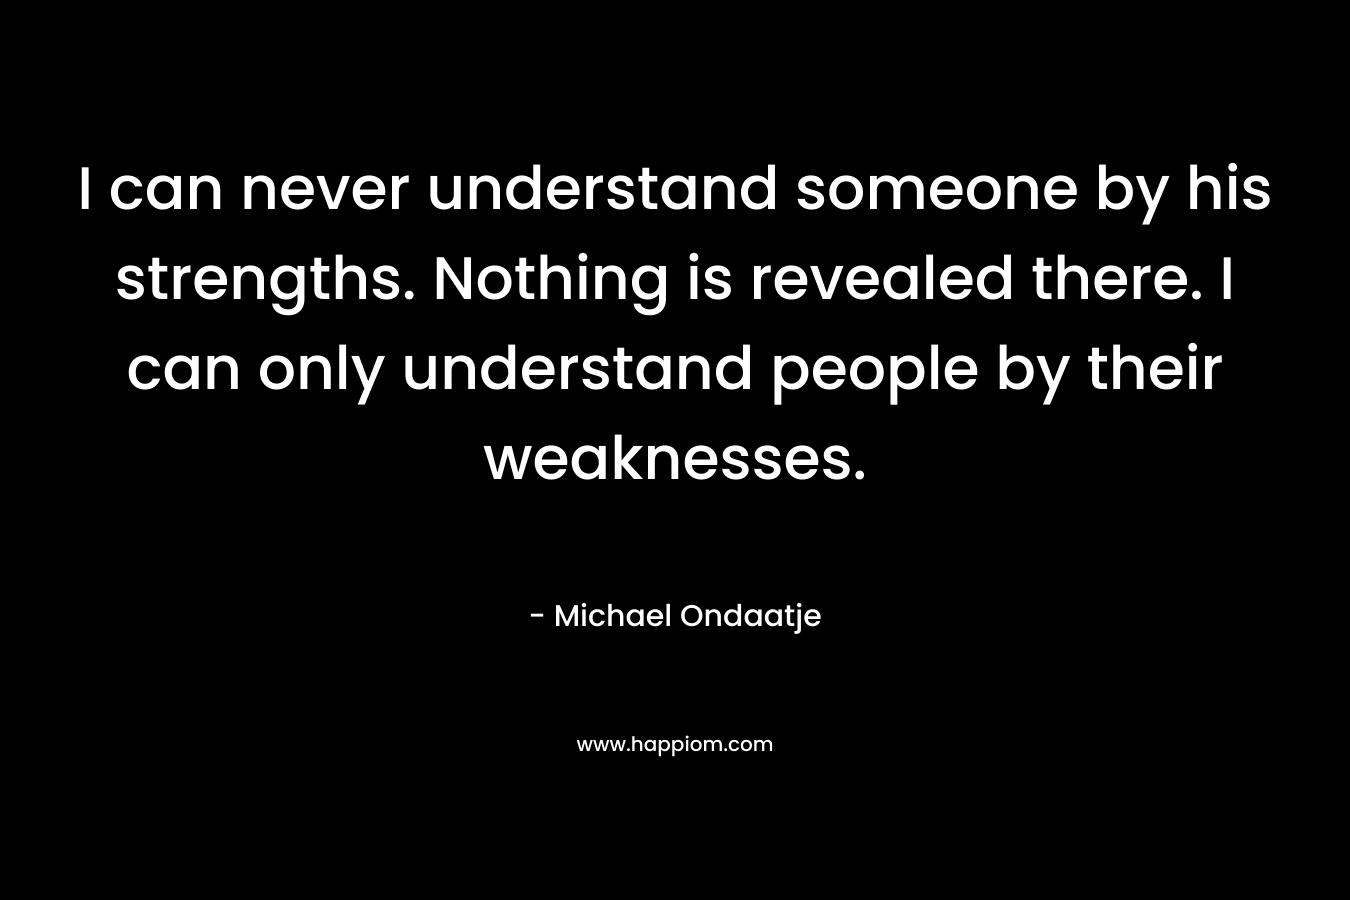 I can never understand someone by his strengths. Nothing is revealed there. I can only understand people by their weaknesses.